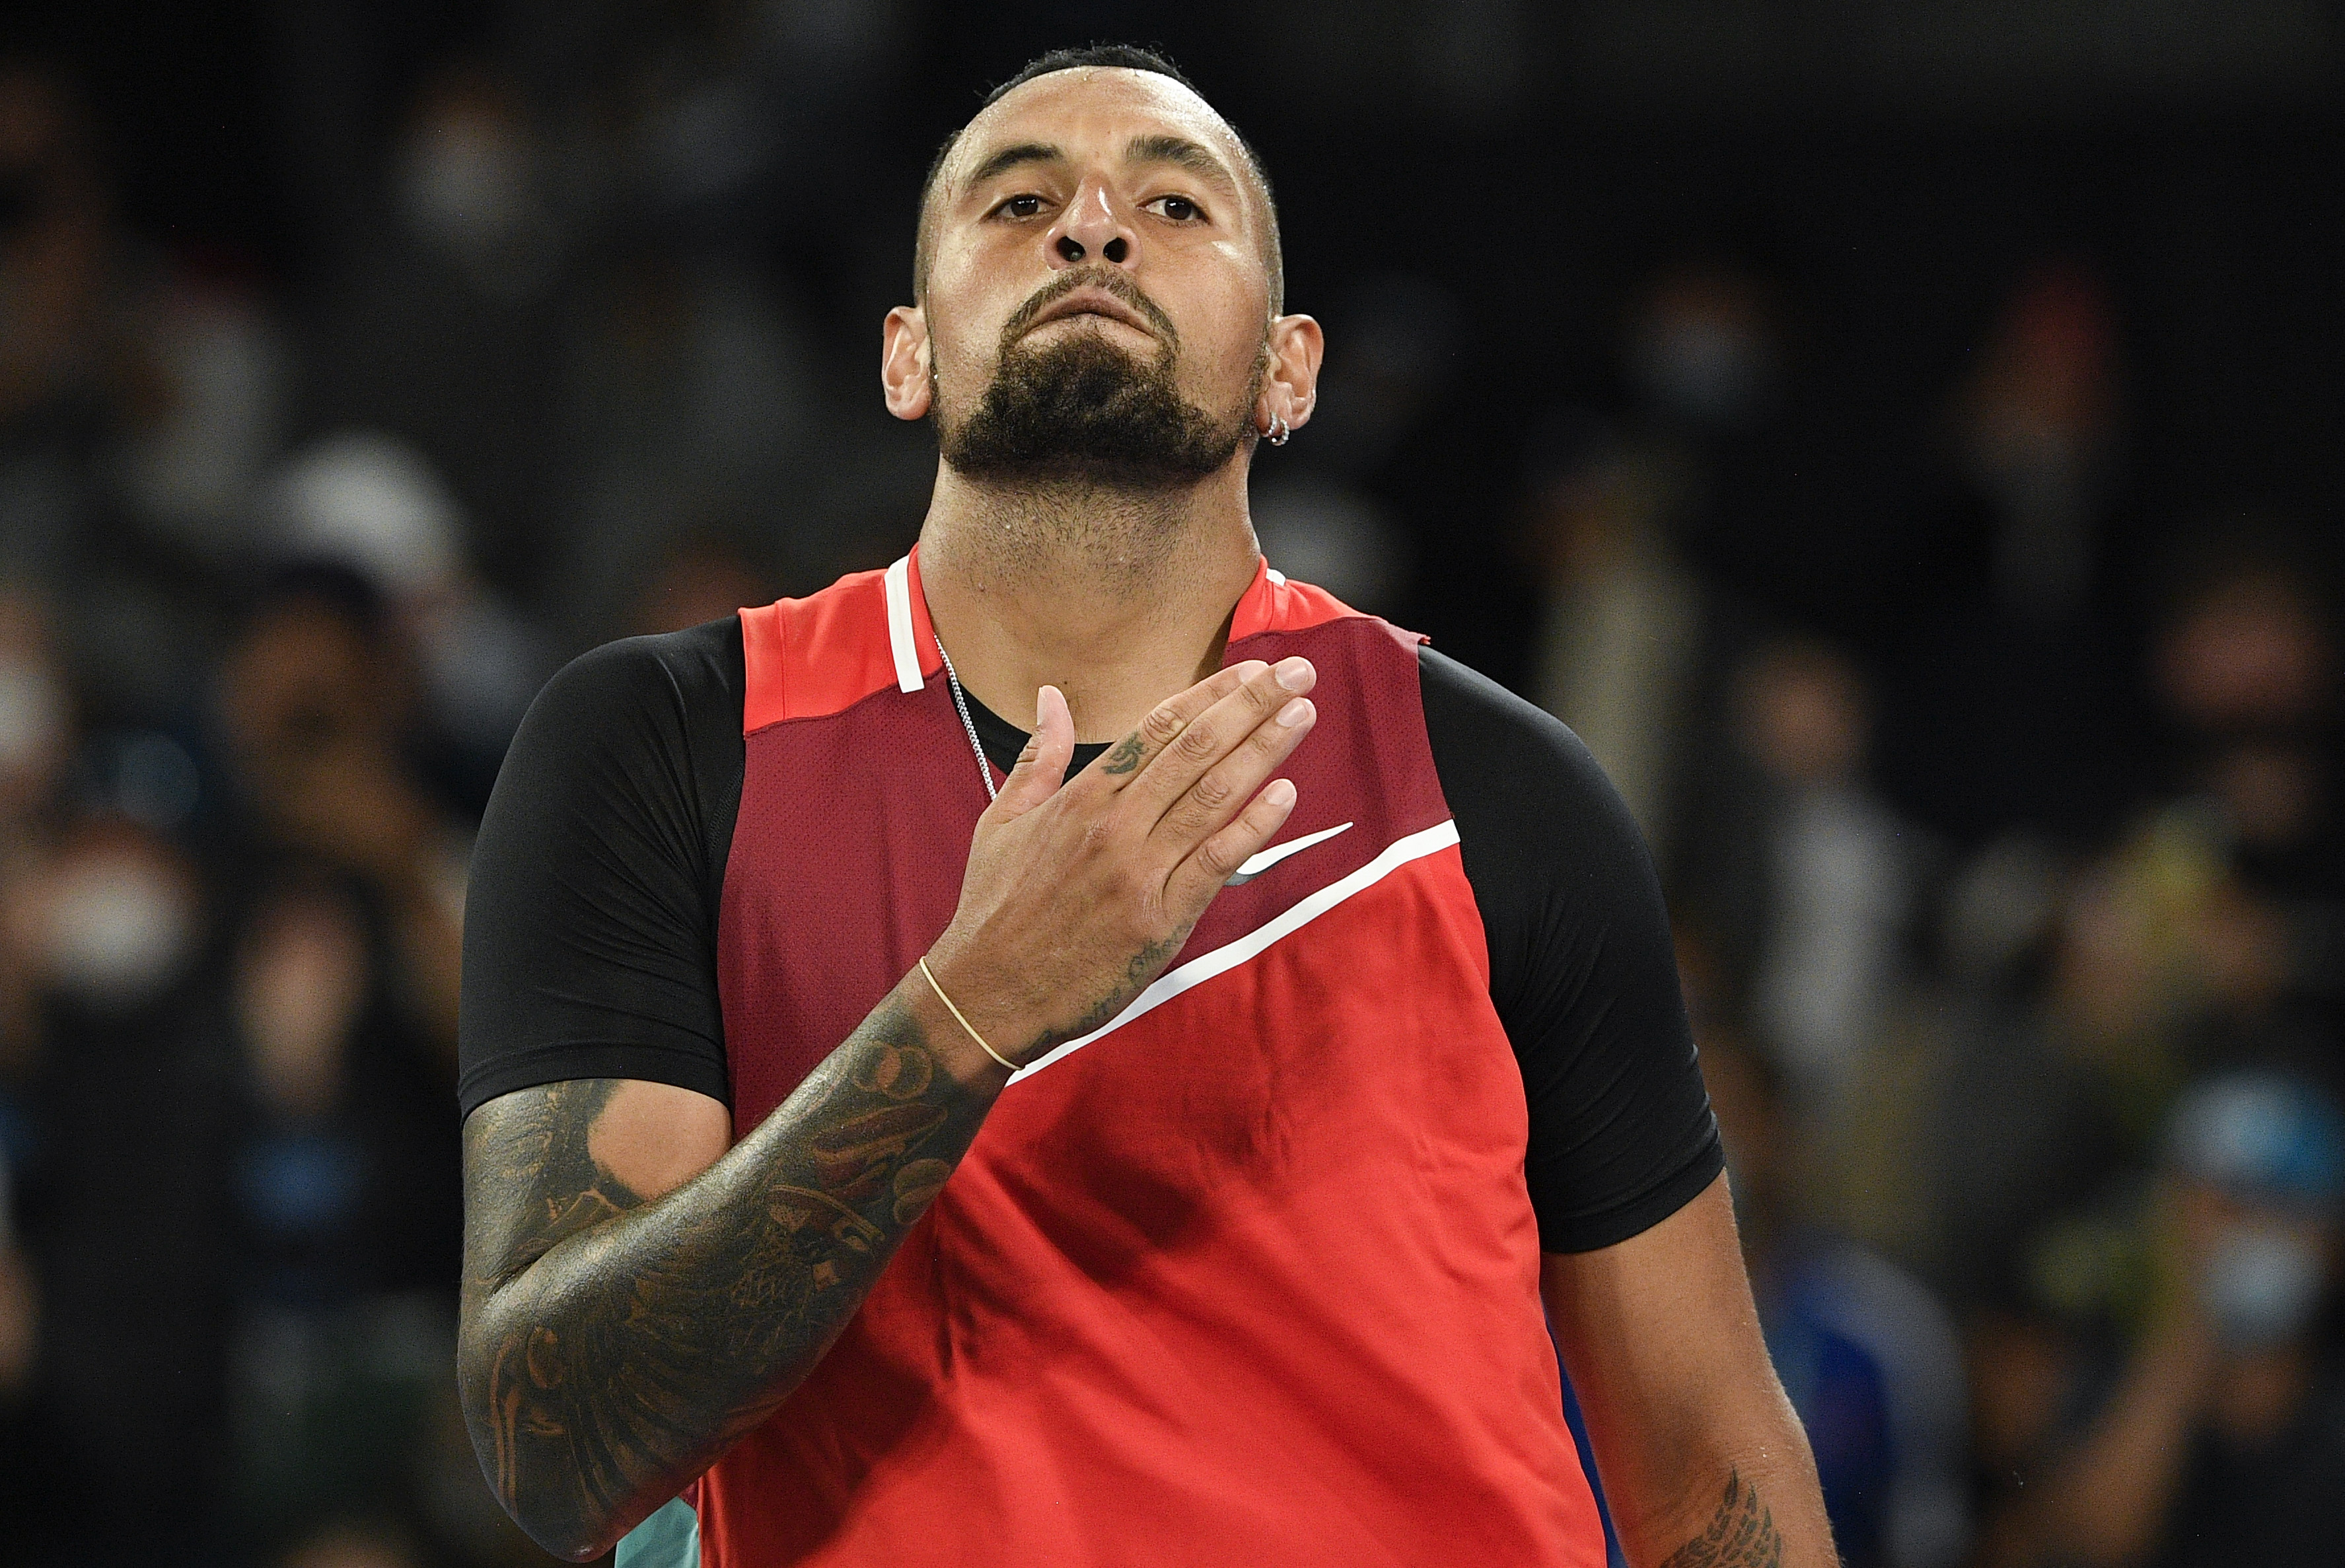 Nick Kyrgios Says He Had Suicidal Thoughts in Post About One of His 'Darkest Periods' thumbnail